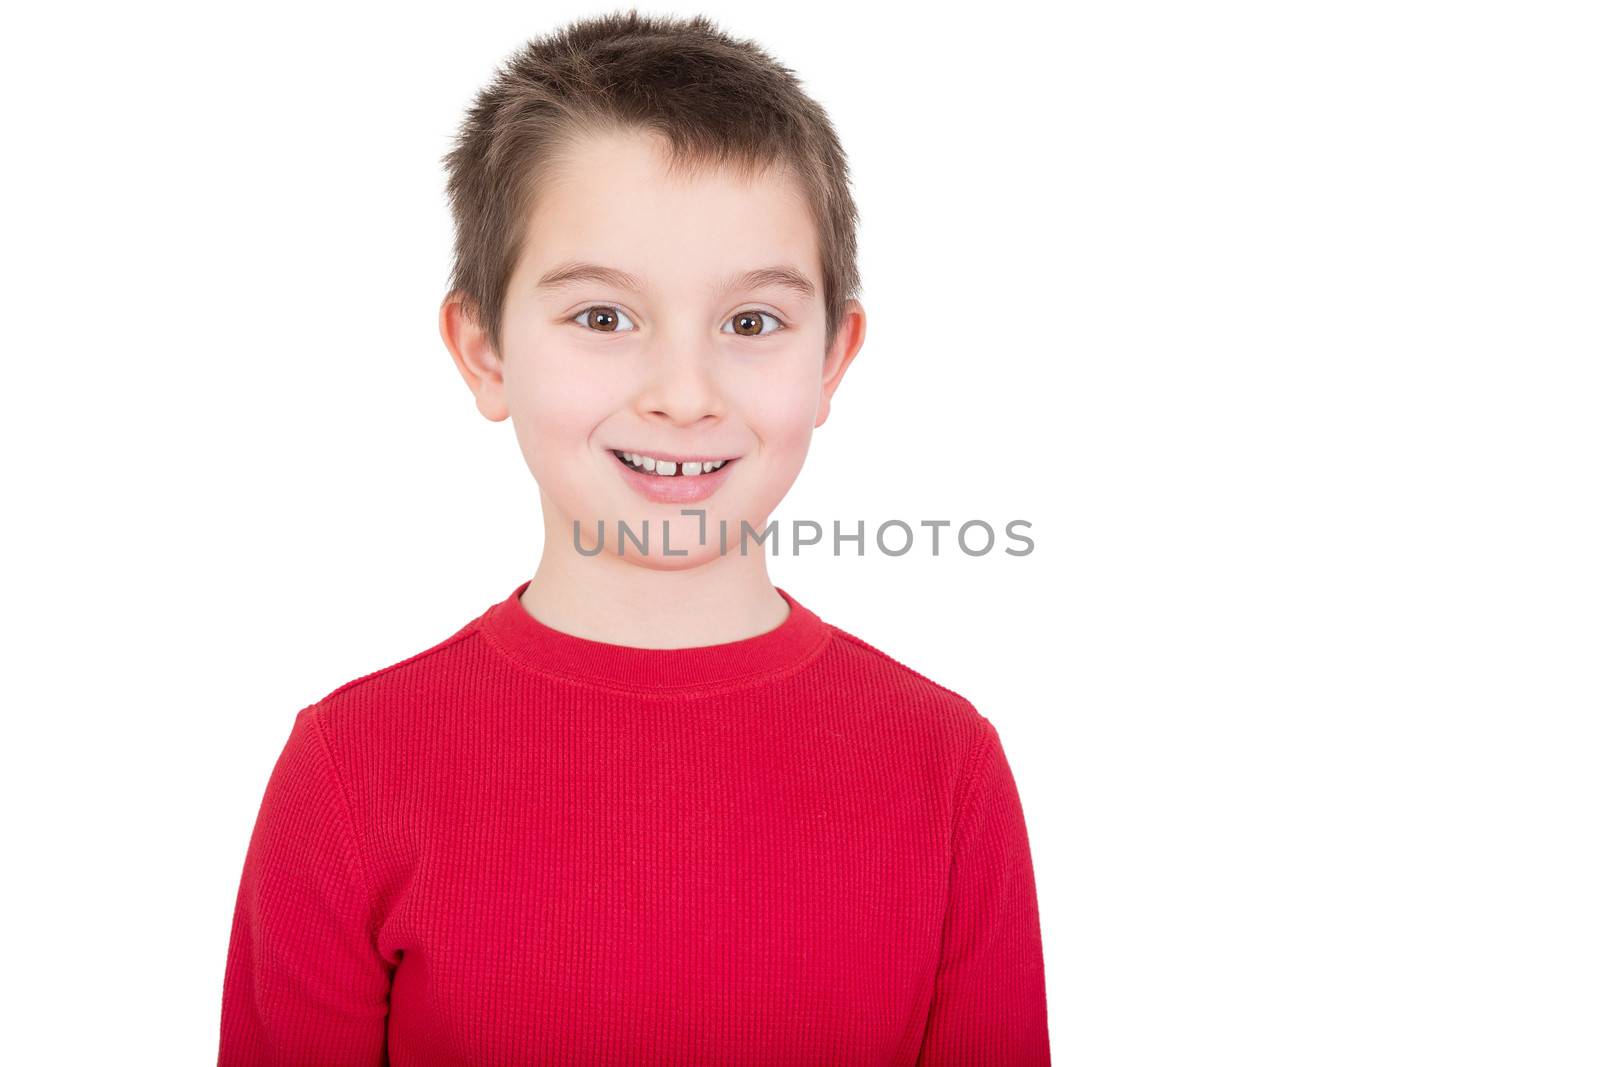 Young boy in a red t-shirt with a happy grin and alert expression, isolated on white